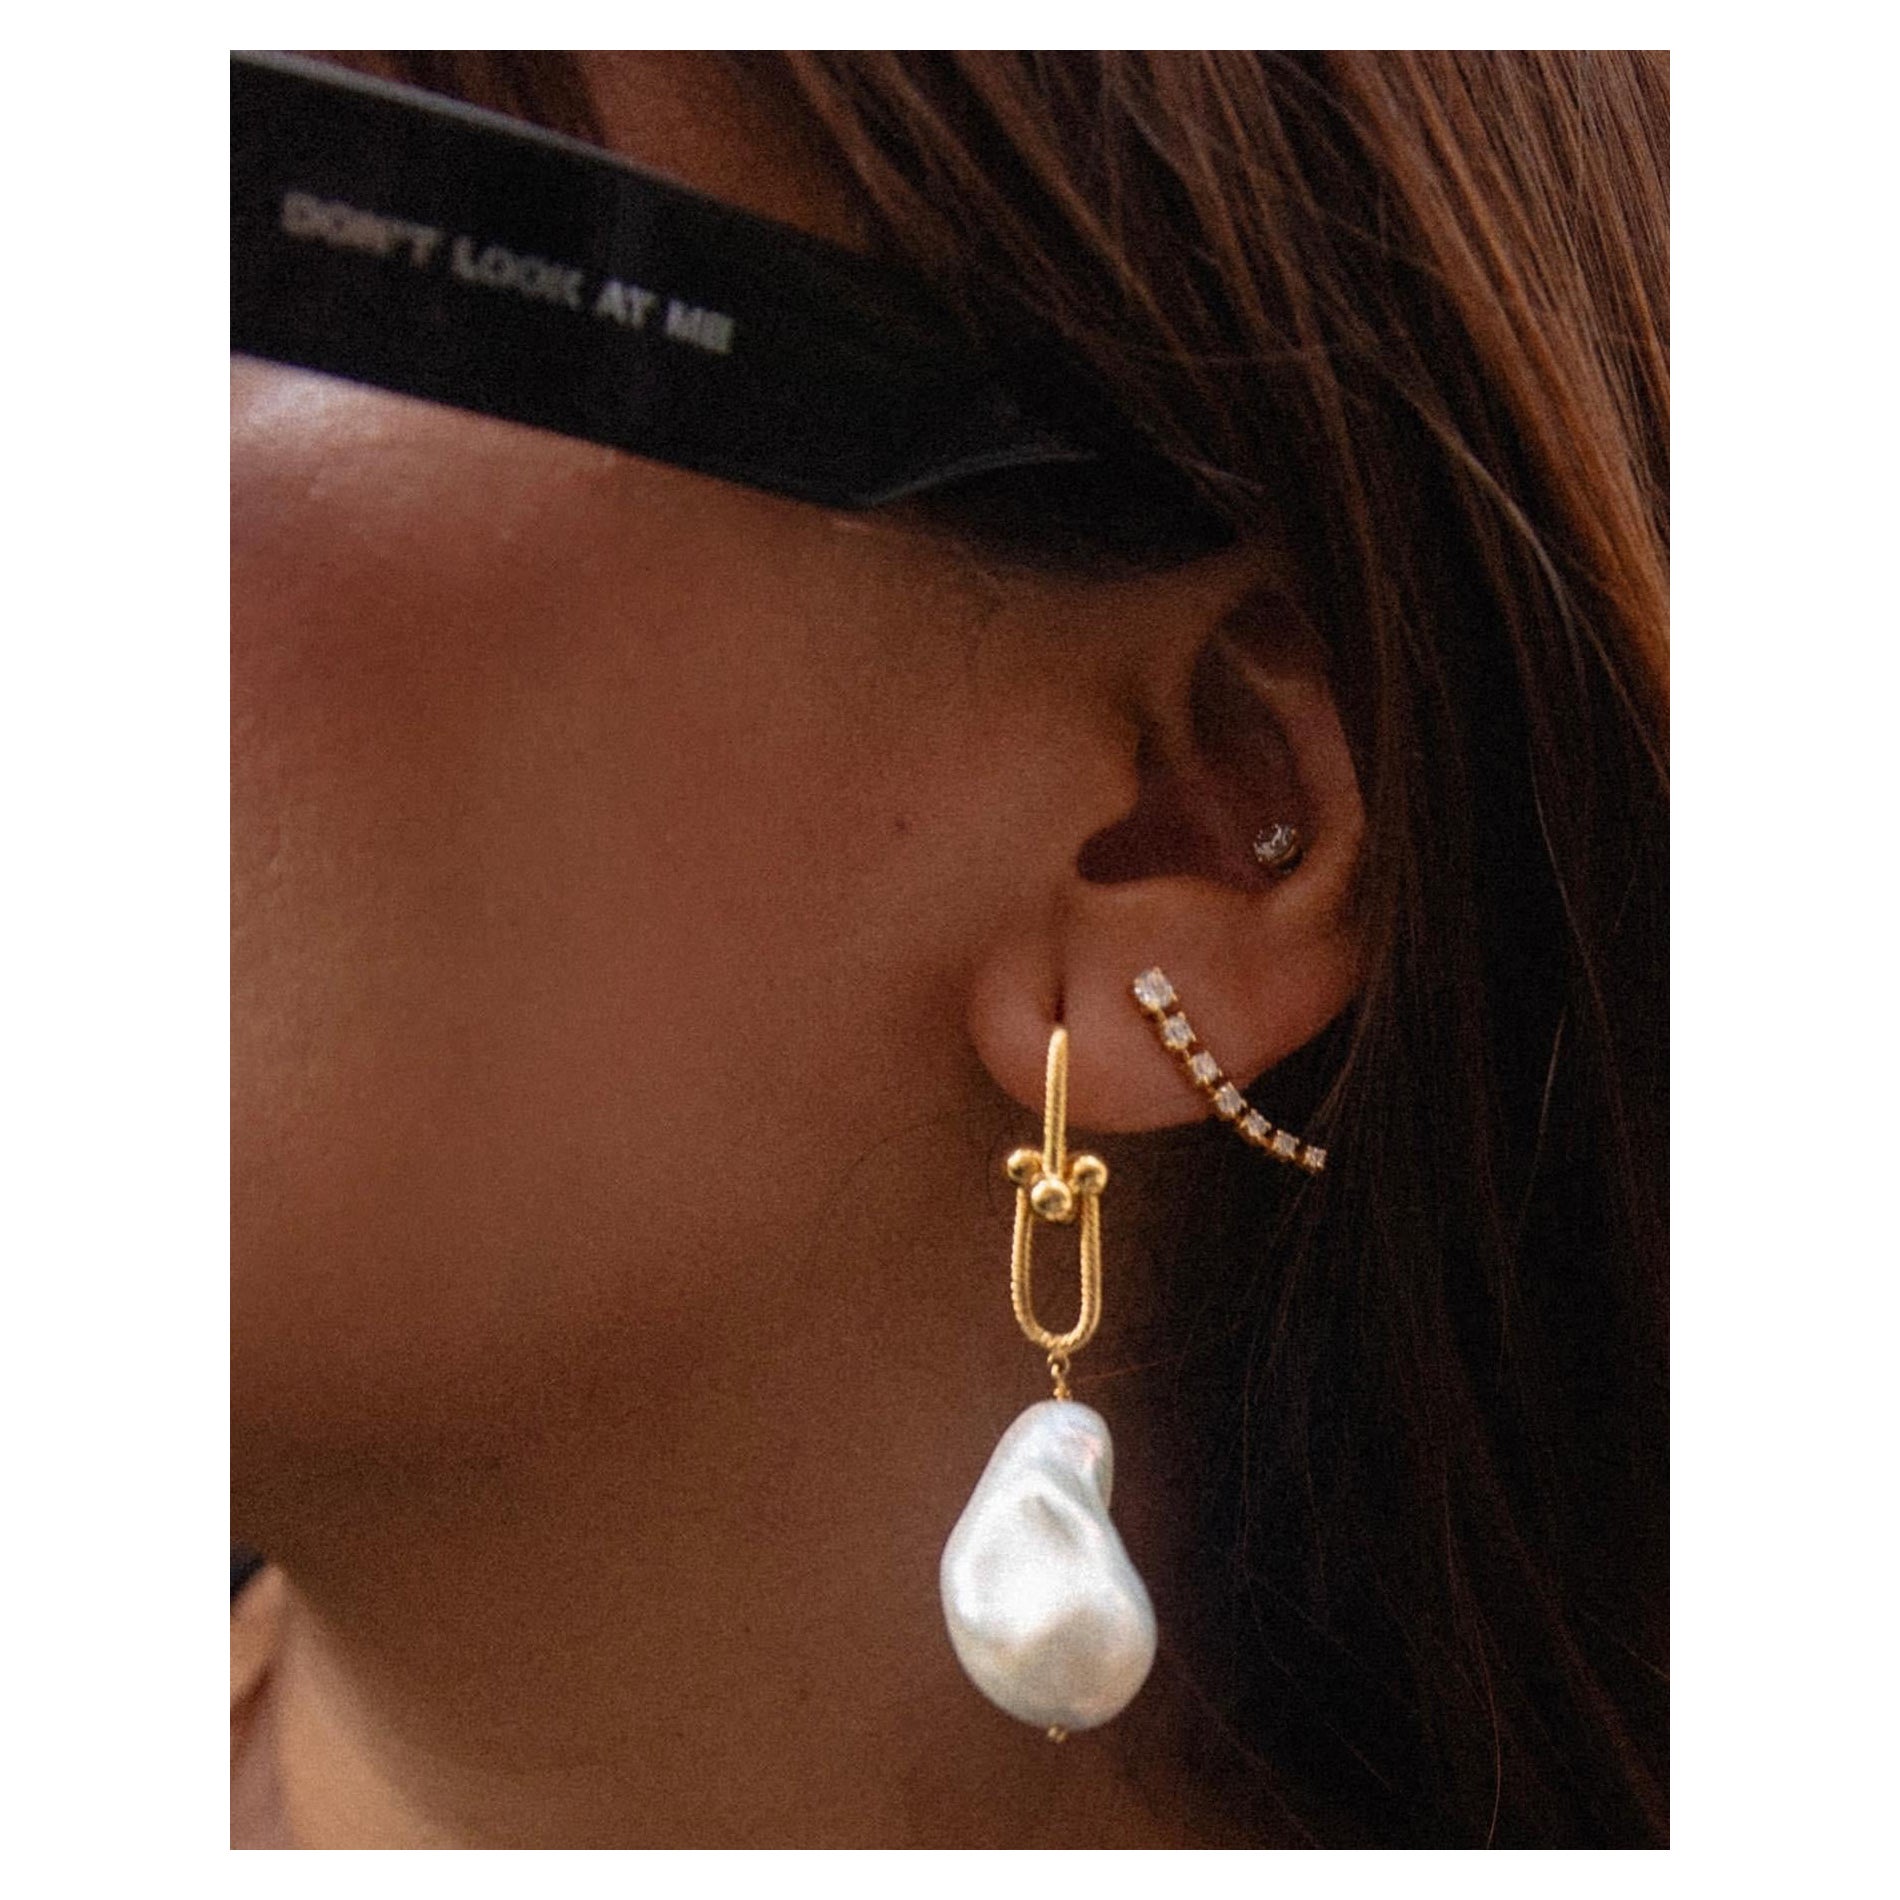 Tiffany inspired Hardware Earring in 14k Gold and Pearl For Sale